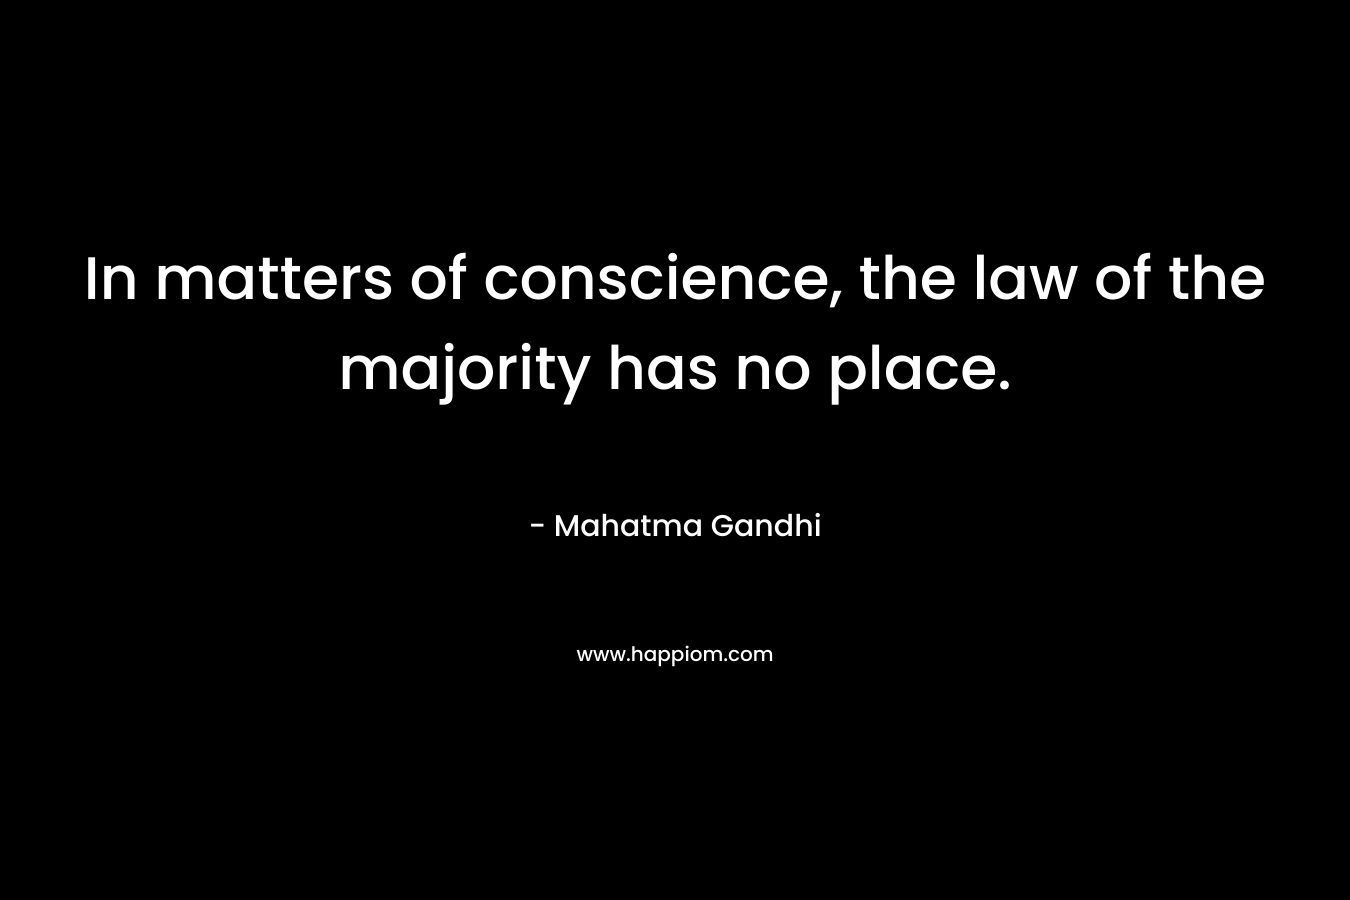 In matters of conscience, the law of the majority has no place.